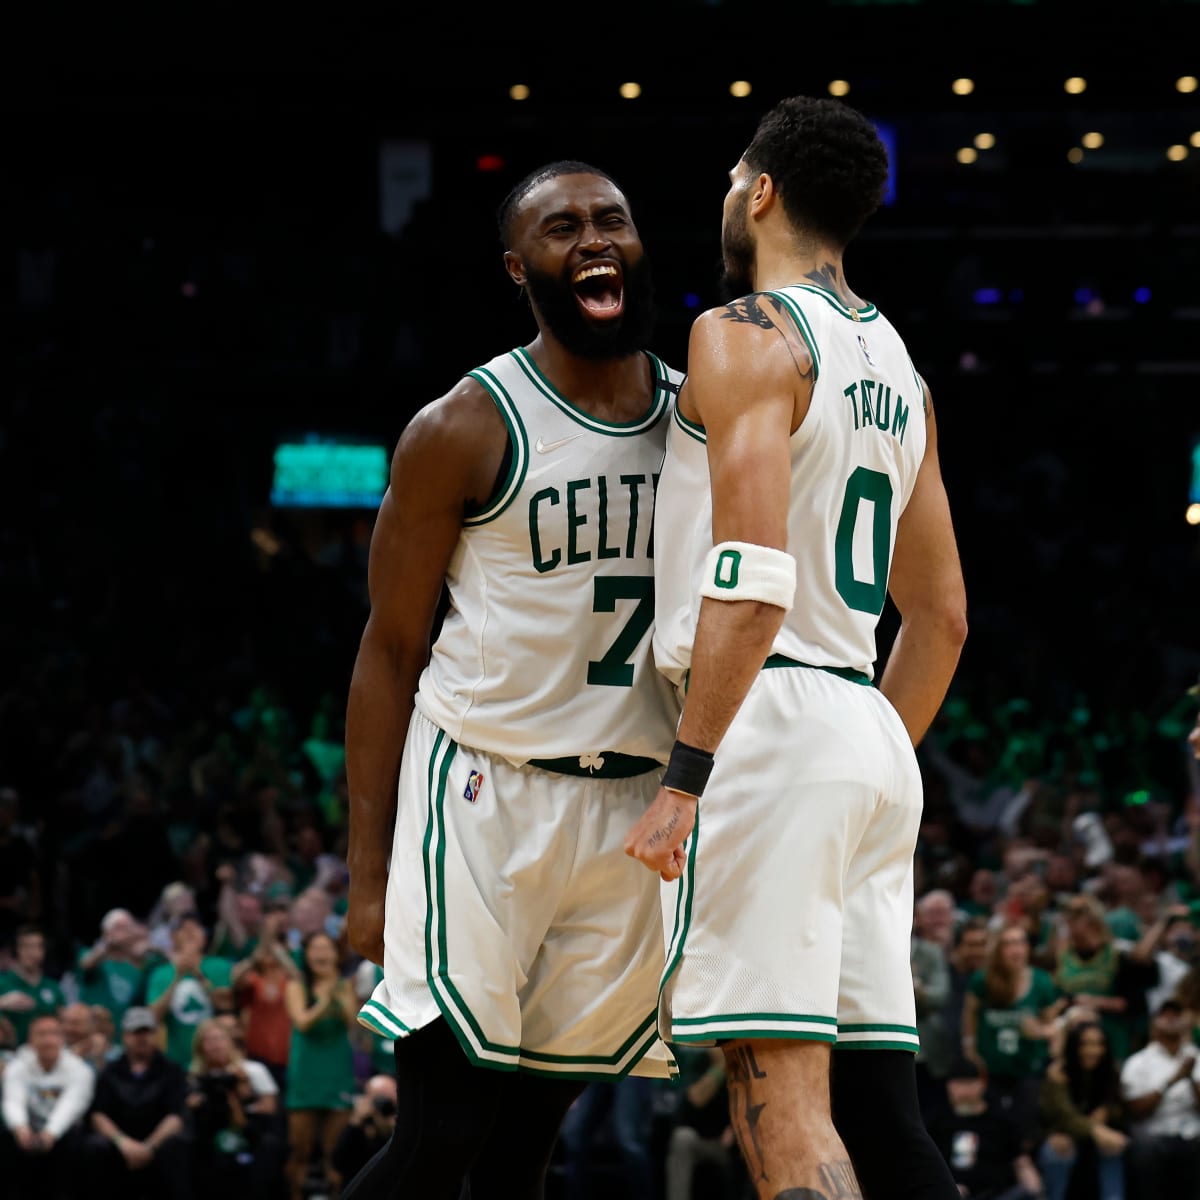 Game Or Not, Celtics' Jaylen Brown Will Be An All-Star This Year